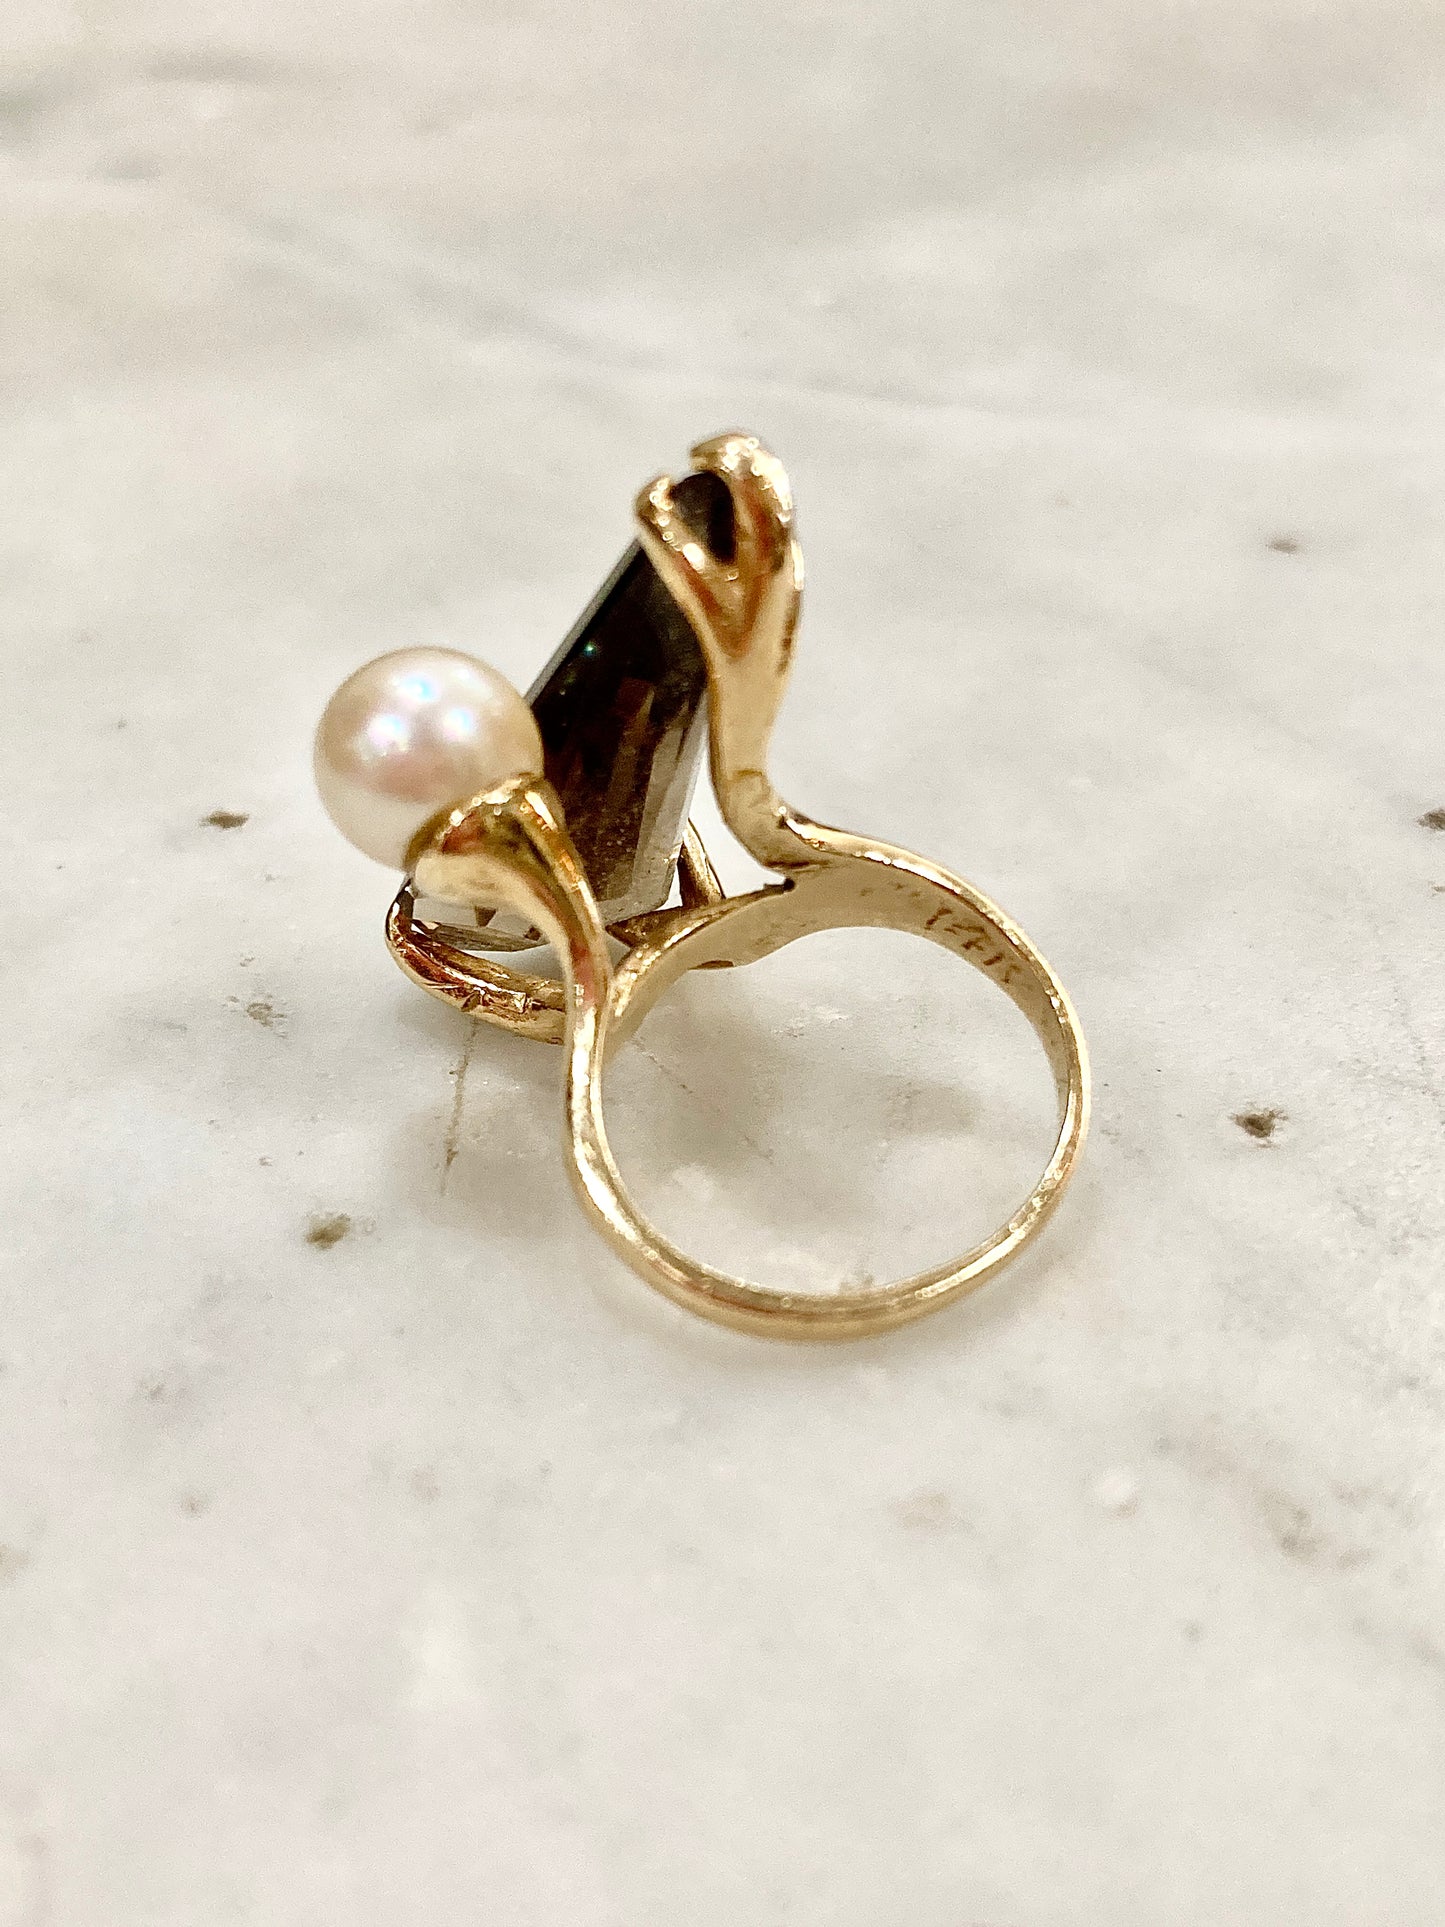 Vintage MCM 14K Yellow Gold Smokey Topaz Cultured Pearl Abstract Ring